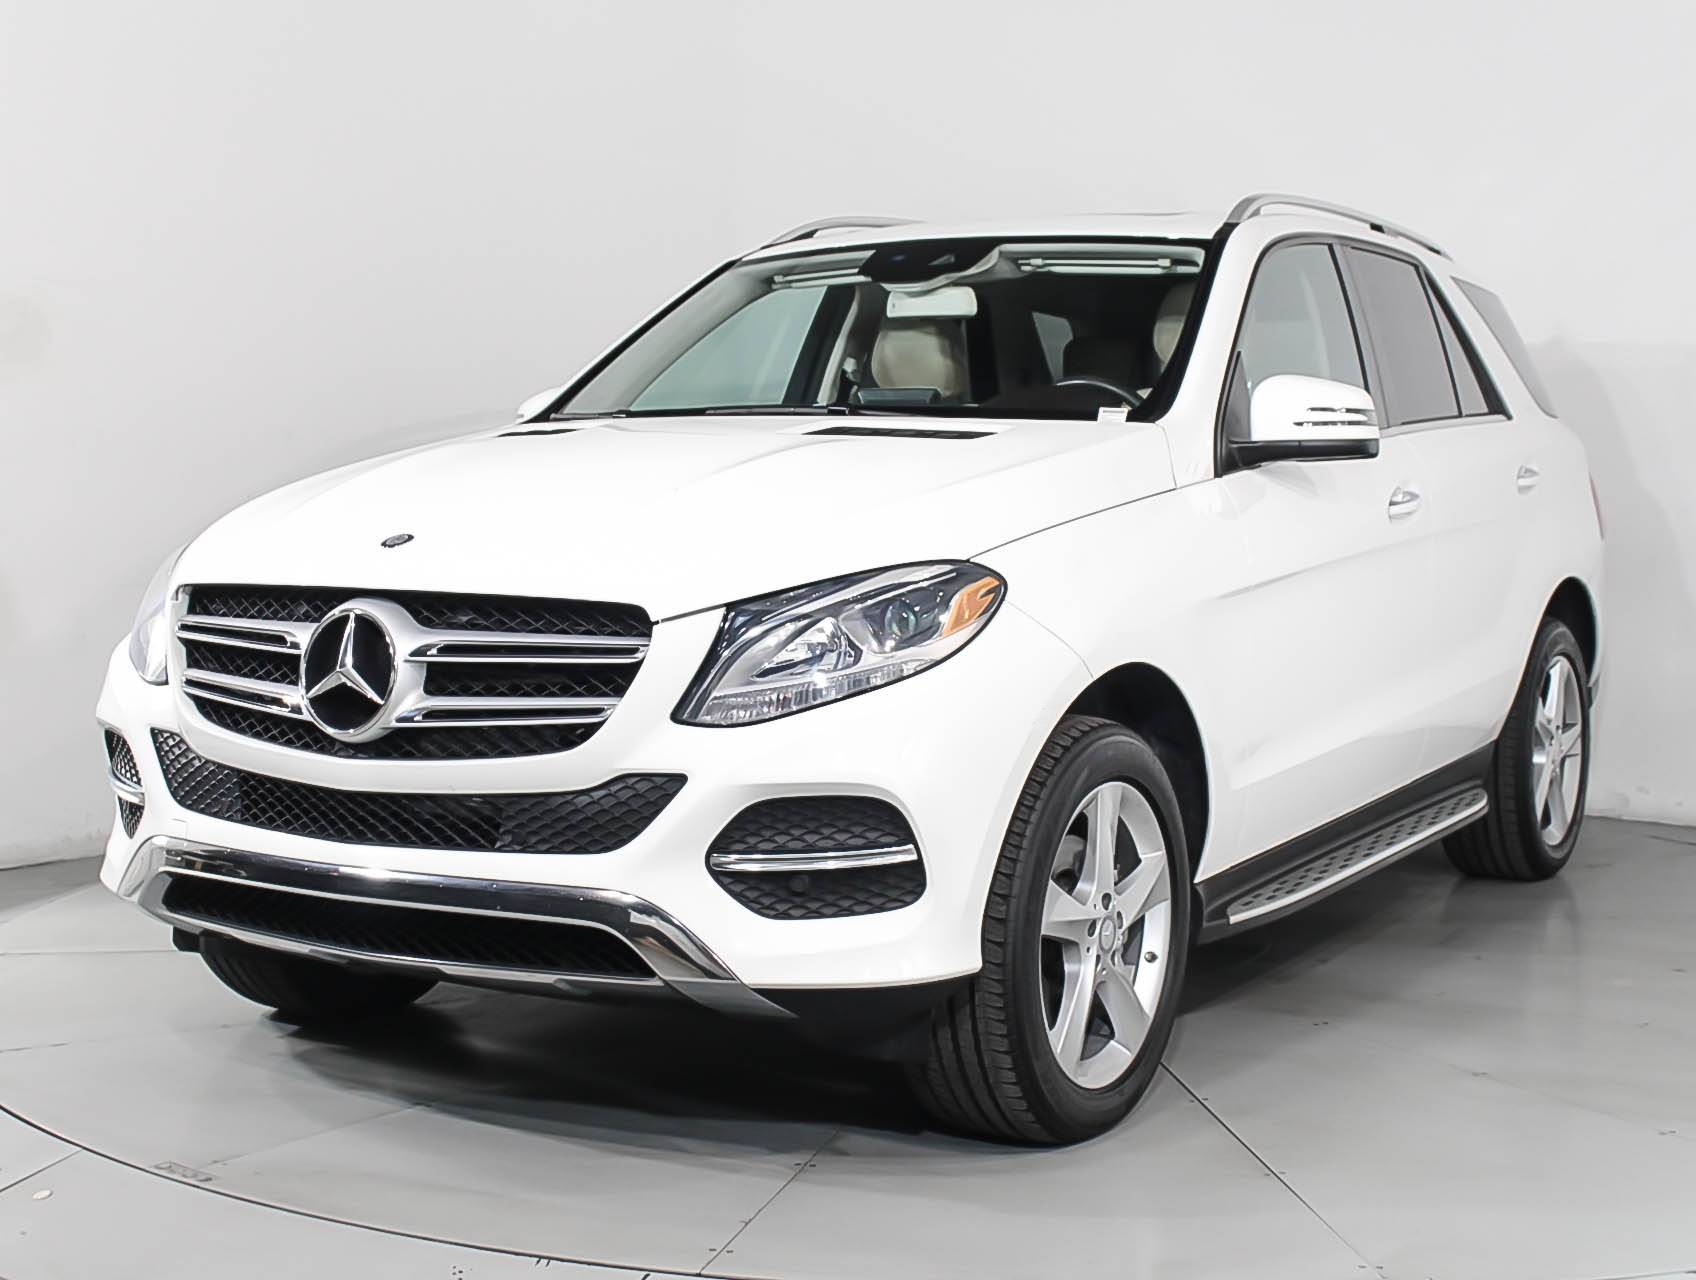 Florida Fine Cars - Used MERCEDES-BENZ GLE CLASS 2016 WEST PALM GLE350